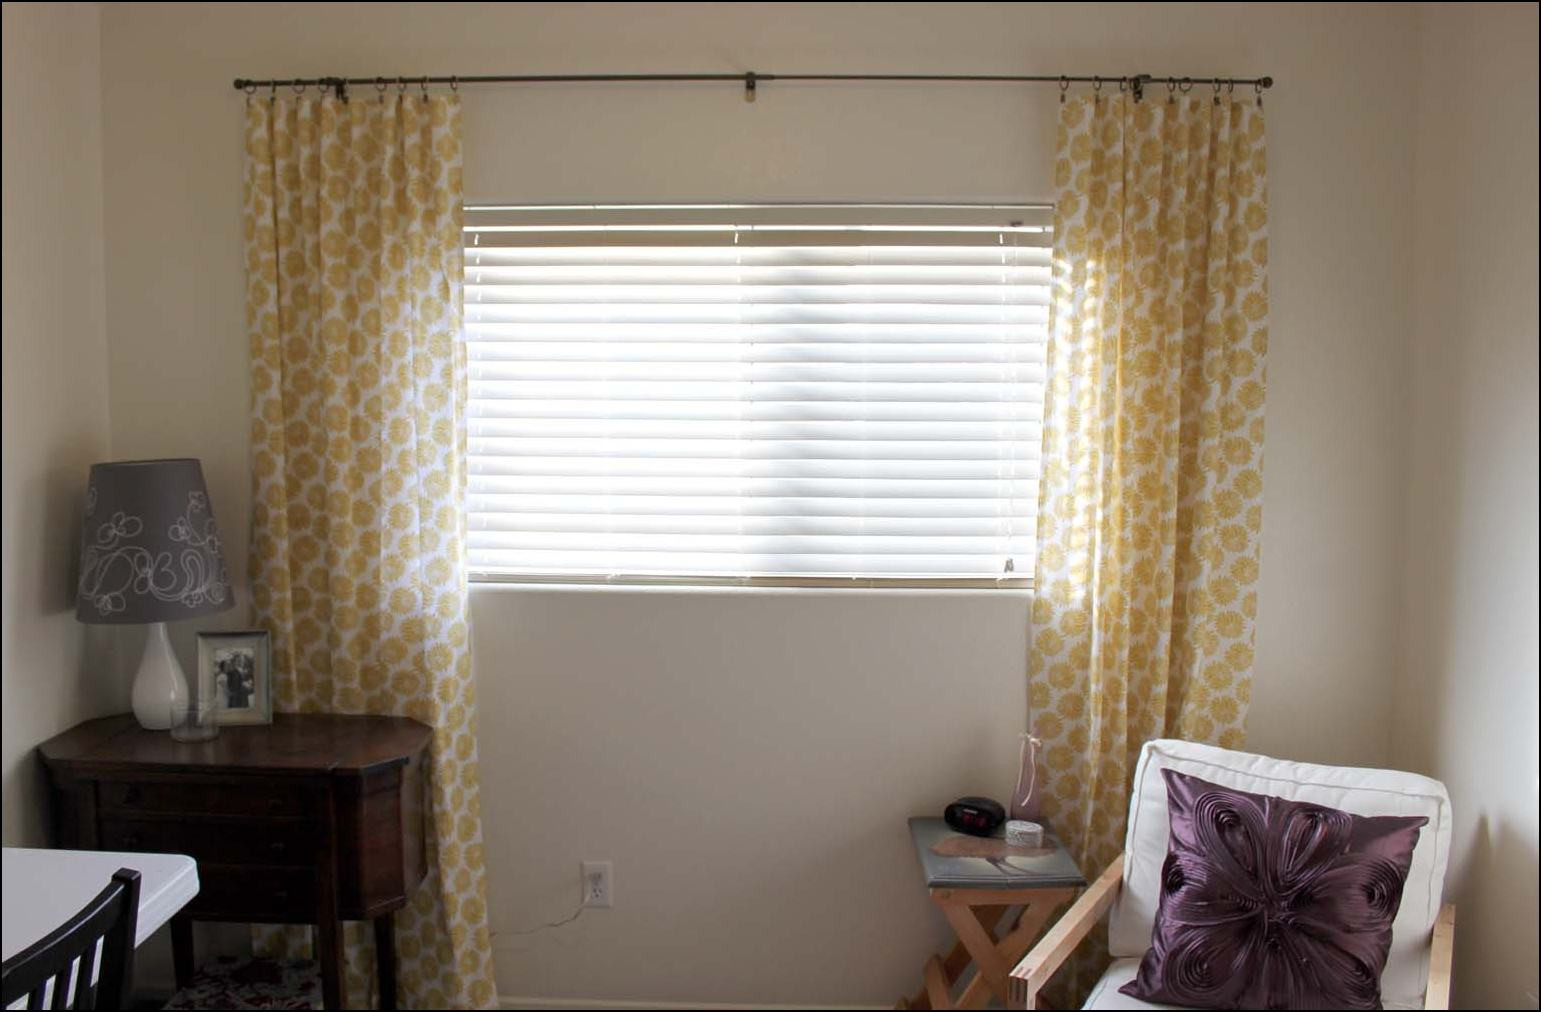 Curtains For Small Bedroom Windows
 Elegant and Playful Window Treatment for Small Windows